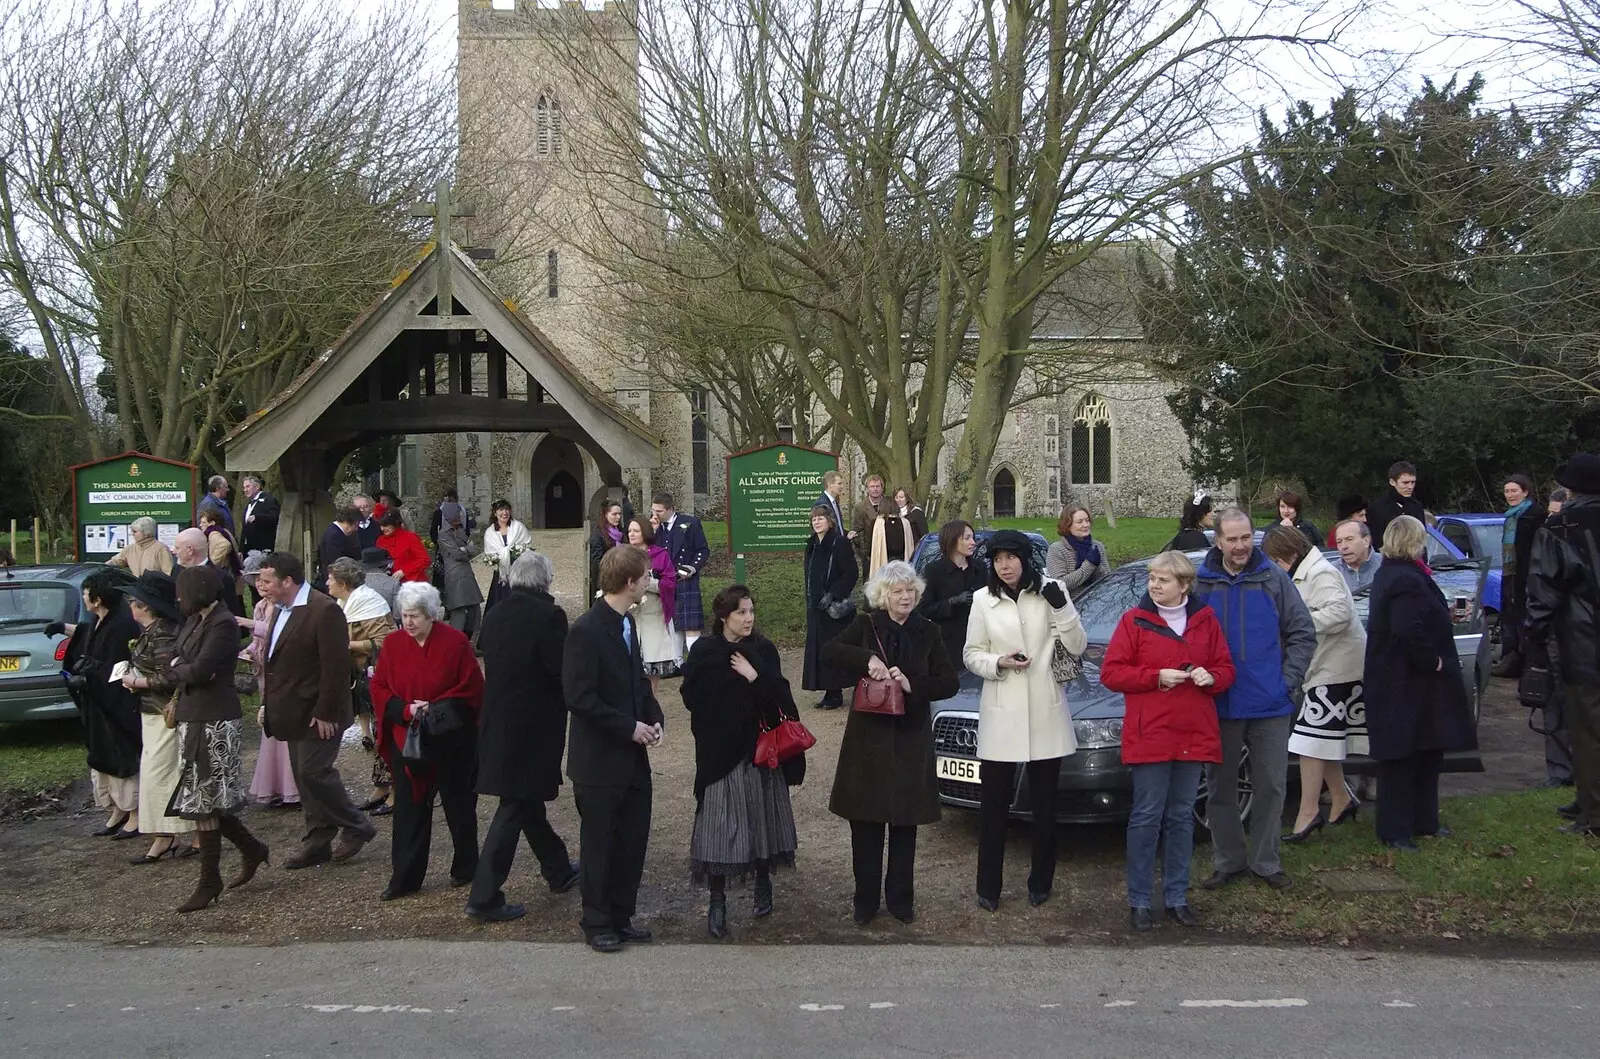 The remaining wedding guests mill around outside the church, from Gov and Rachel's Wedding, Thorndon, Suffolk - 2nd February 2008